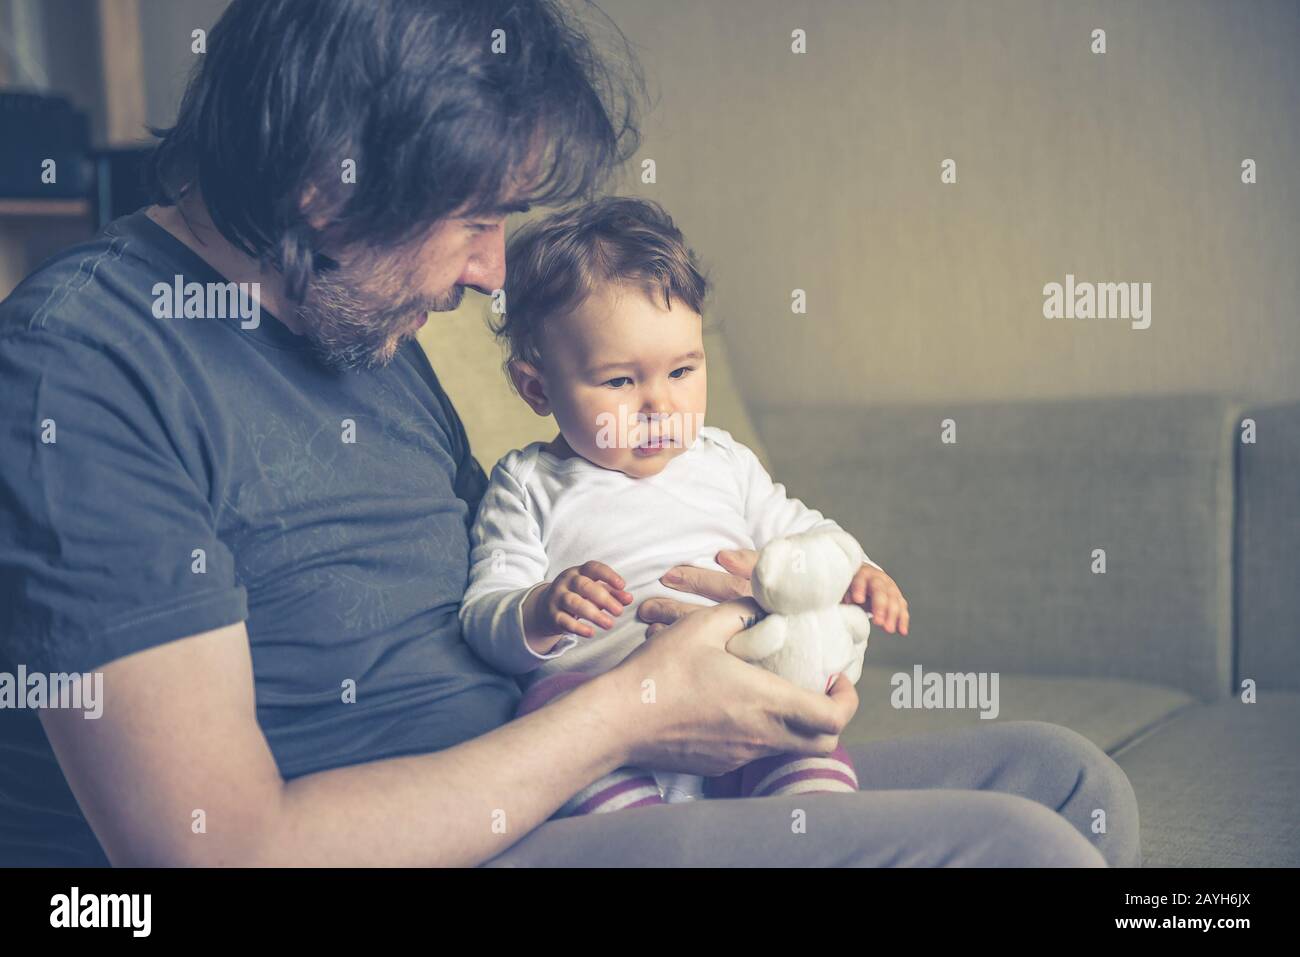 Happy father plays with his baby on the couch at home. The one-year child looks at the teddy bear. Stock Photo